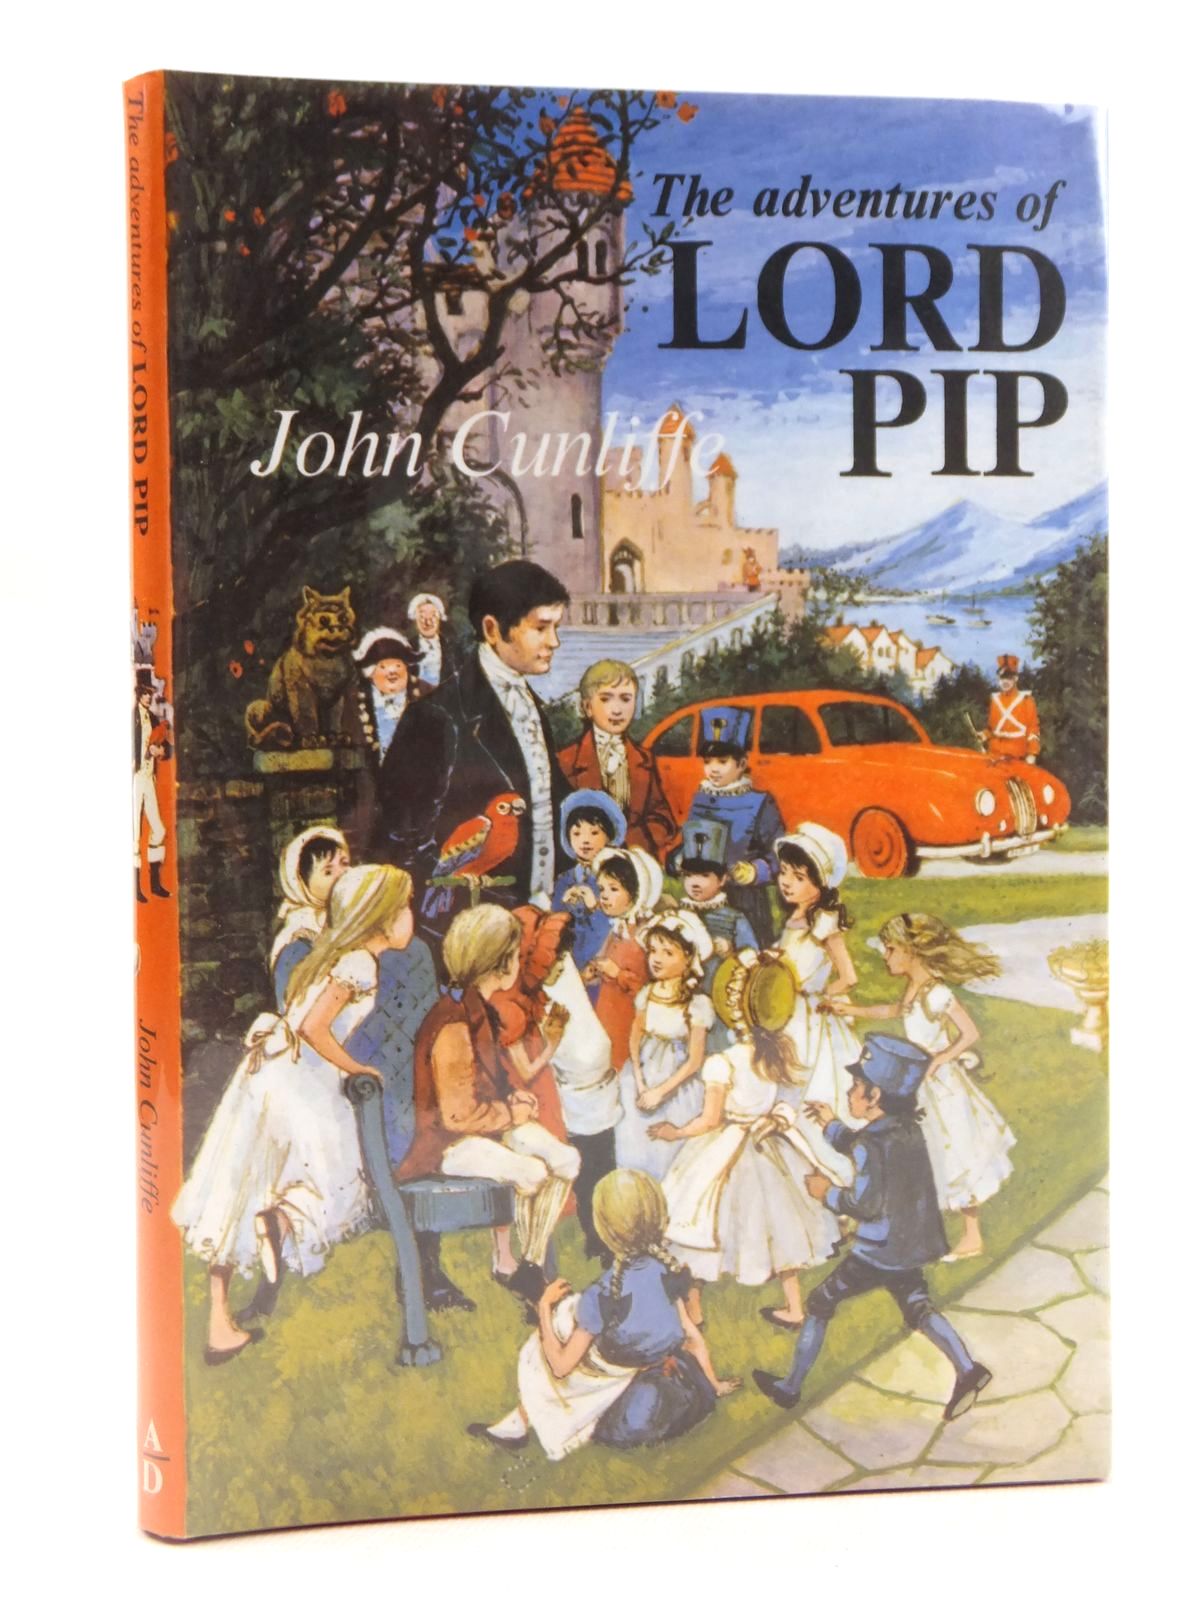 Photo of THE ADVENTURES OF LORD PIP written by Cunliffe, John illustrated by Hales, Robert published by Andre Deutsch (STOCK CODE: 1608390)  for sale by Stella & Rose's Books